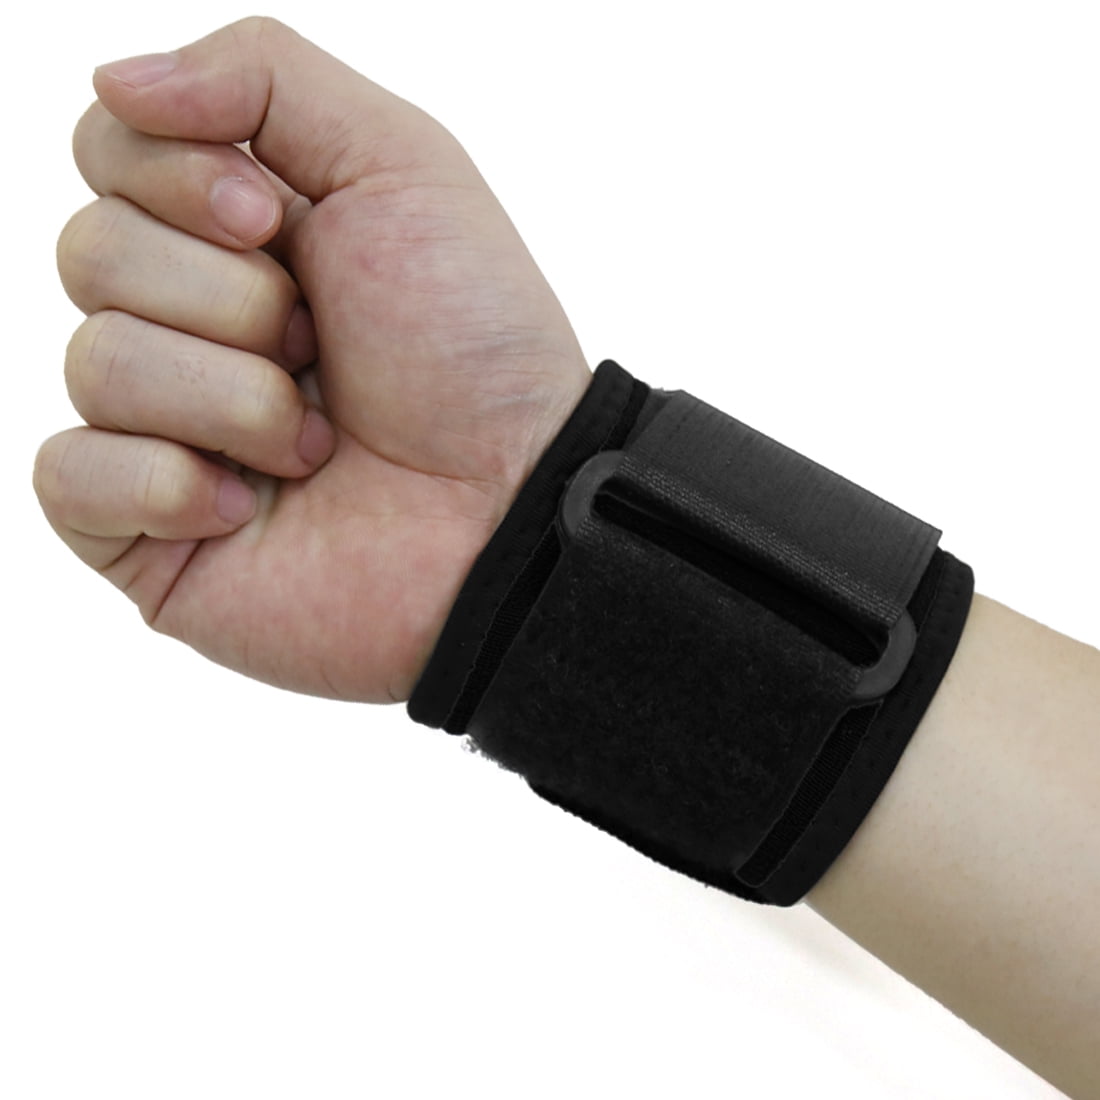 Elastic stretchy Sports Wristband Wrist Support brace wrap Band Gym Protector 